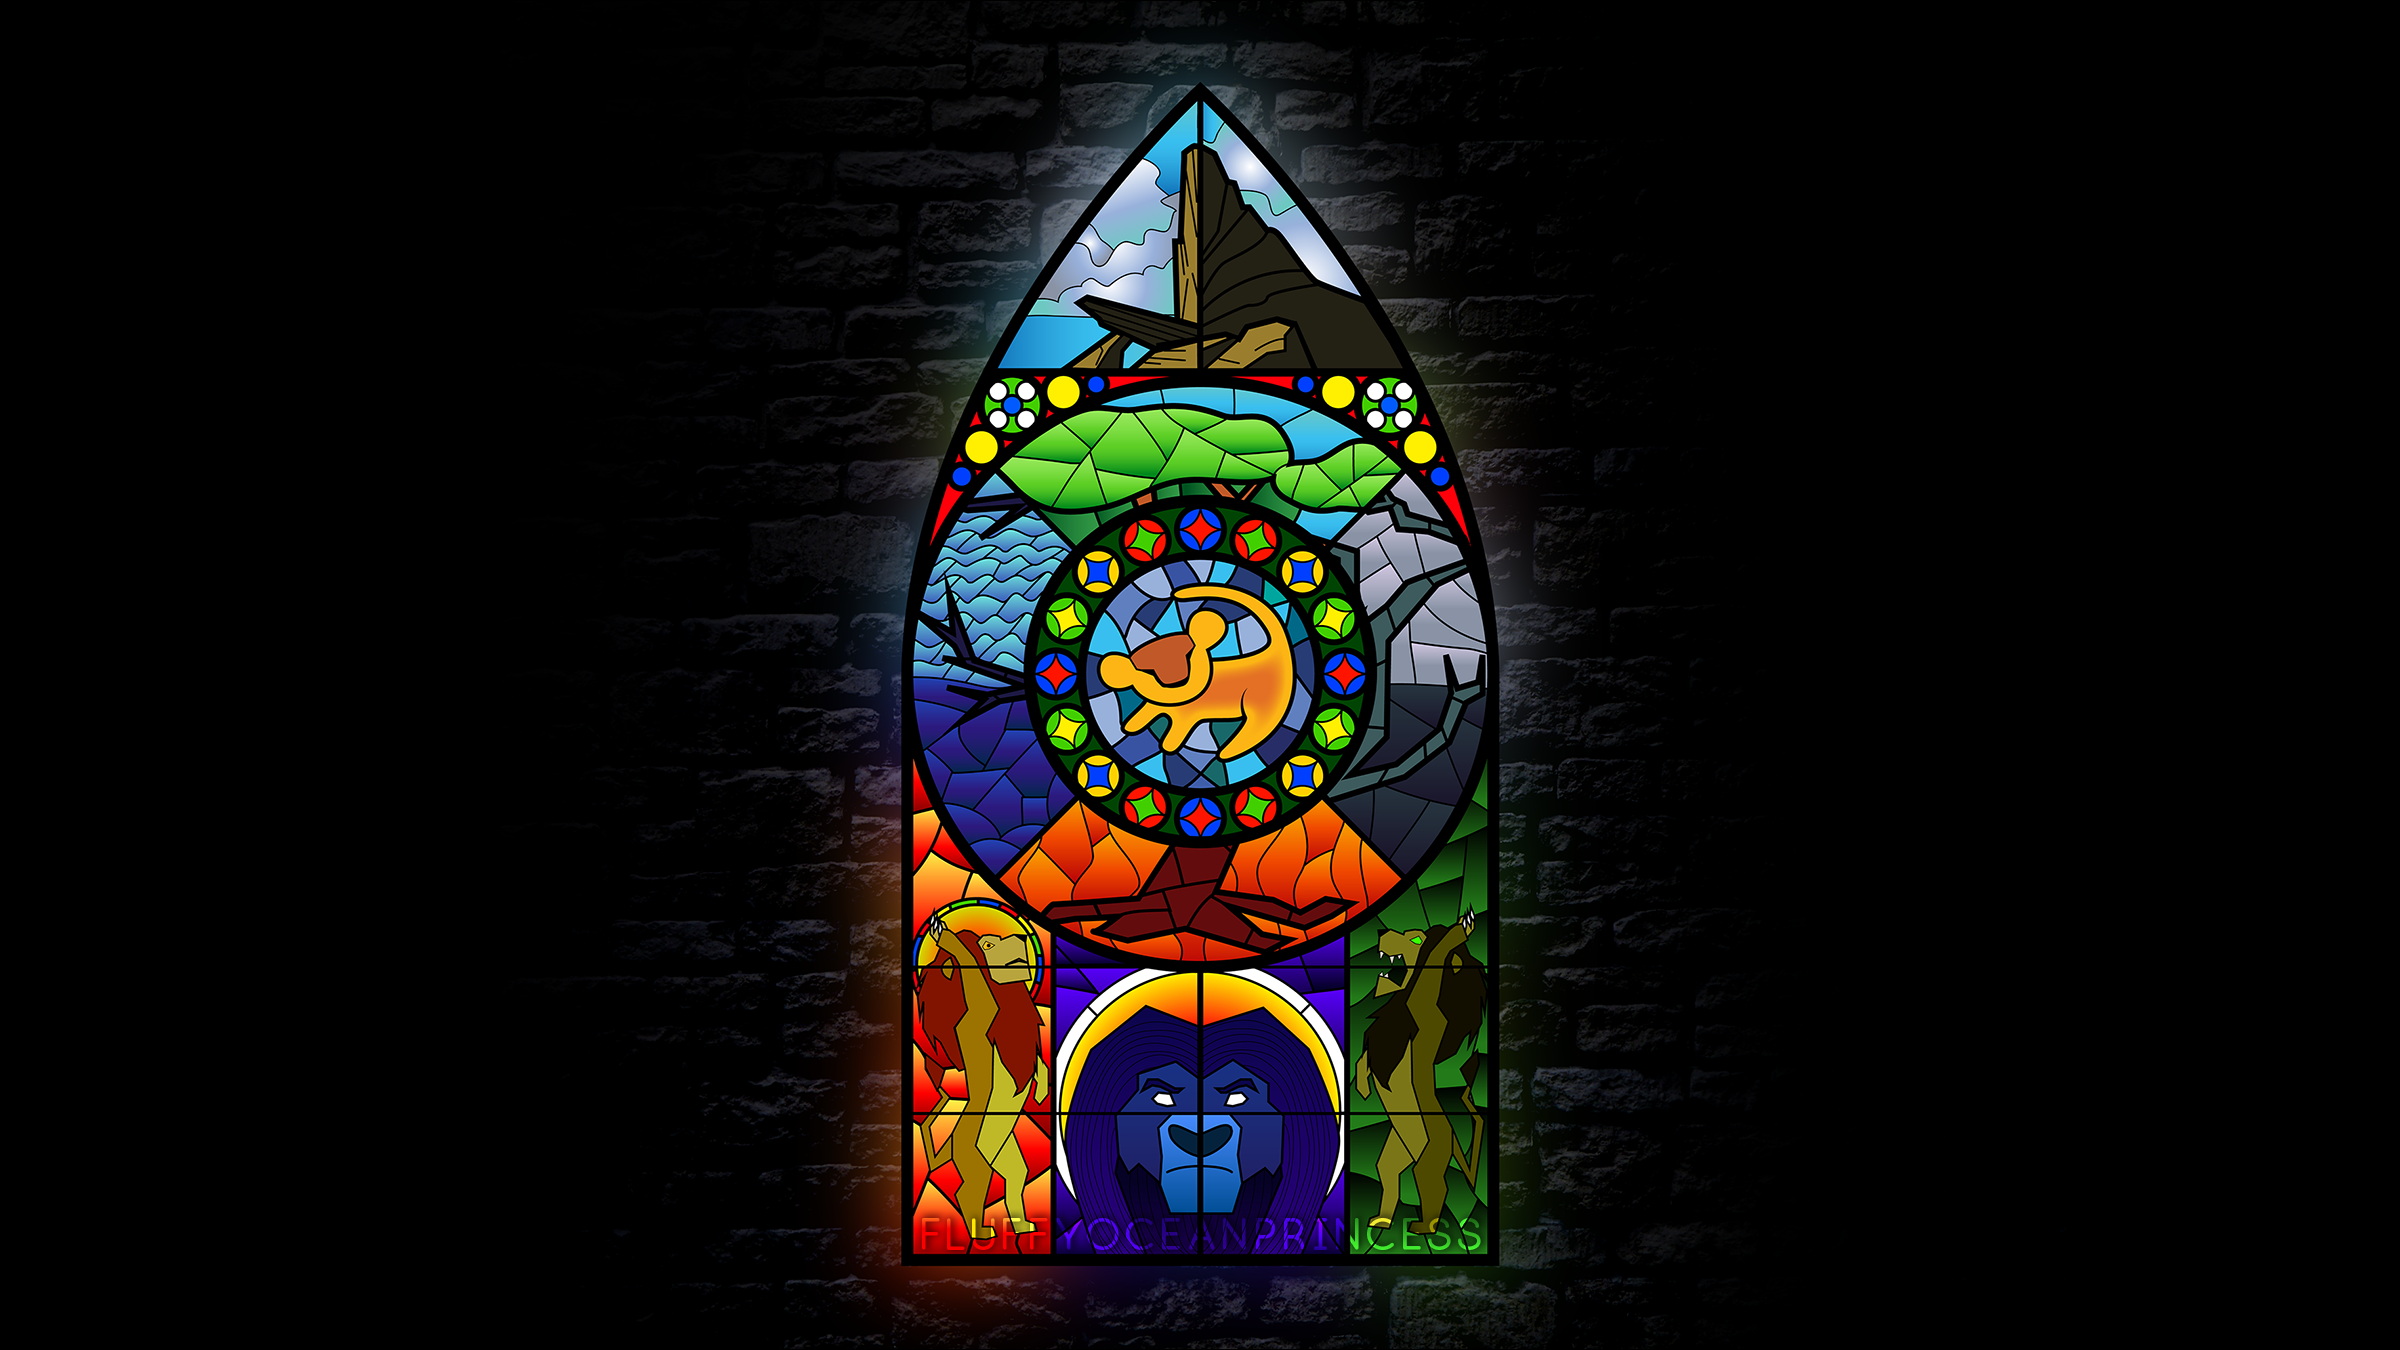 My bf convinced me to get a reddit so I could post this. Stained glass window based on the Lion King. Feel free to use as a wallpaper! [2400 x 1350]